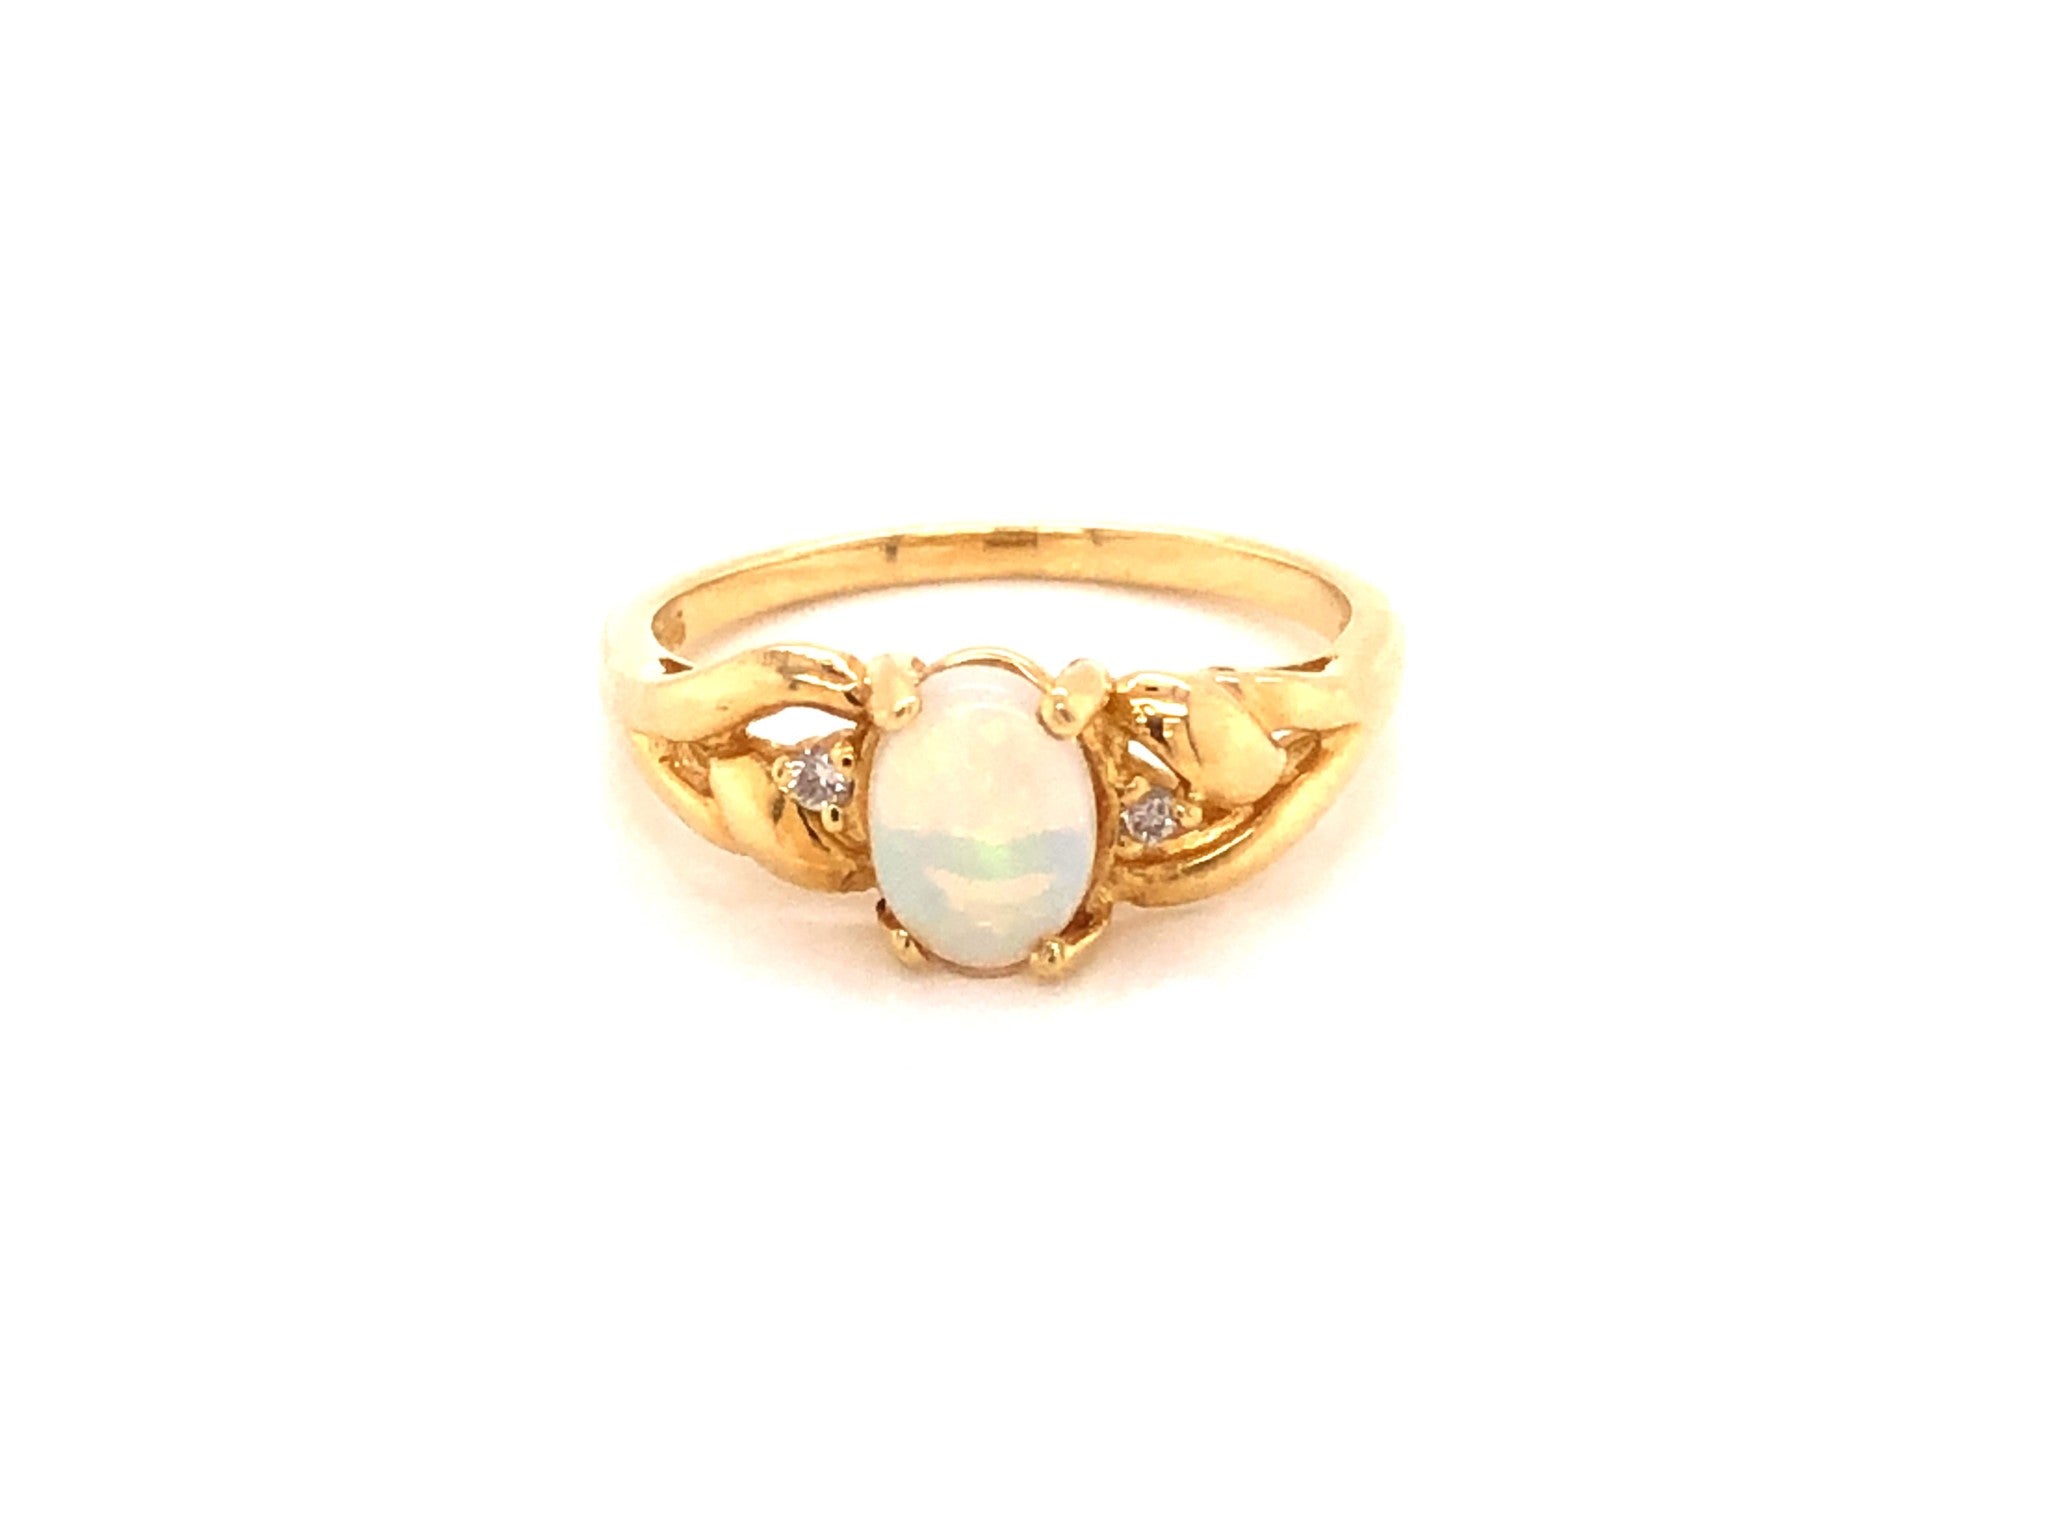 Oval Cabochon White Opal and Diamond Ring in 14k Yellow Gold